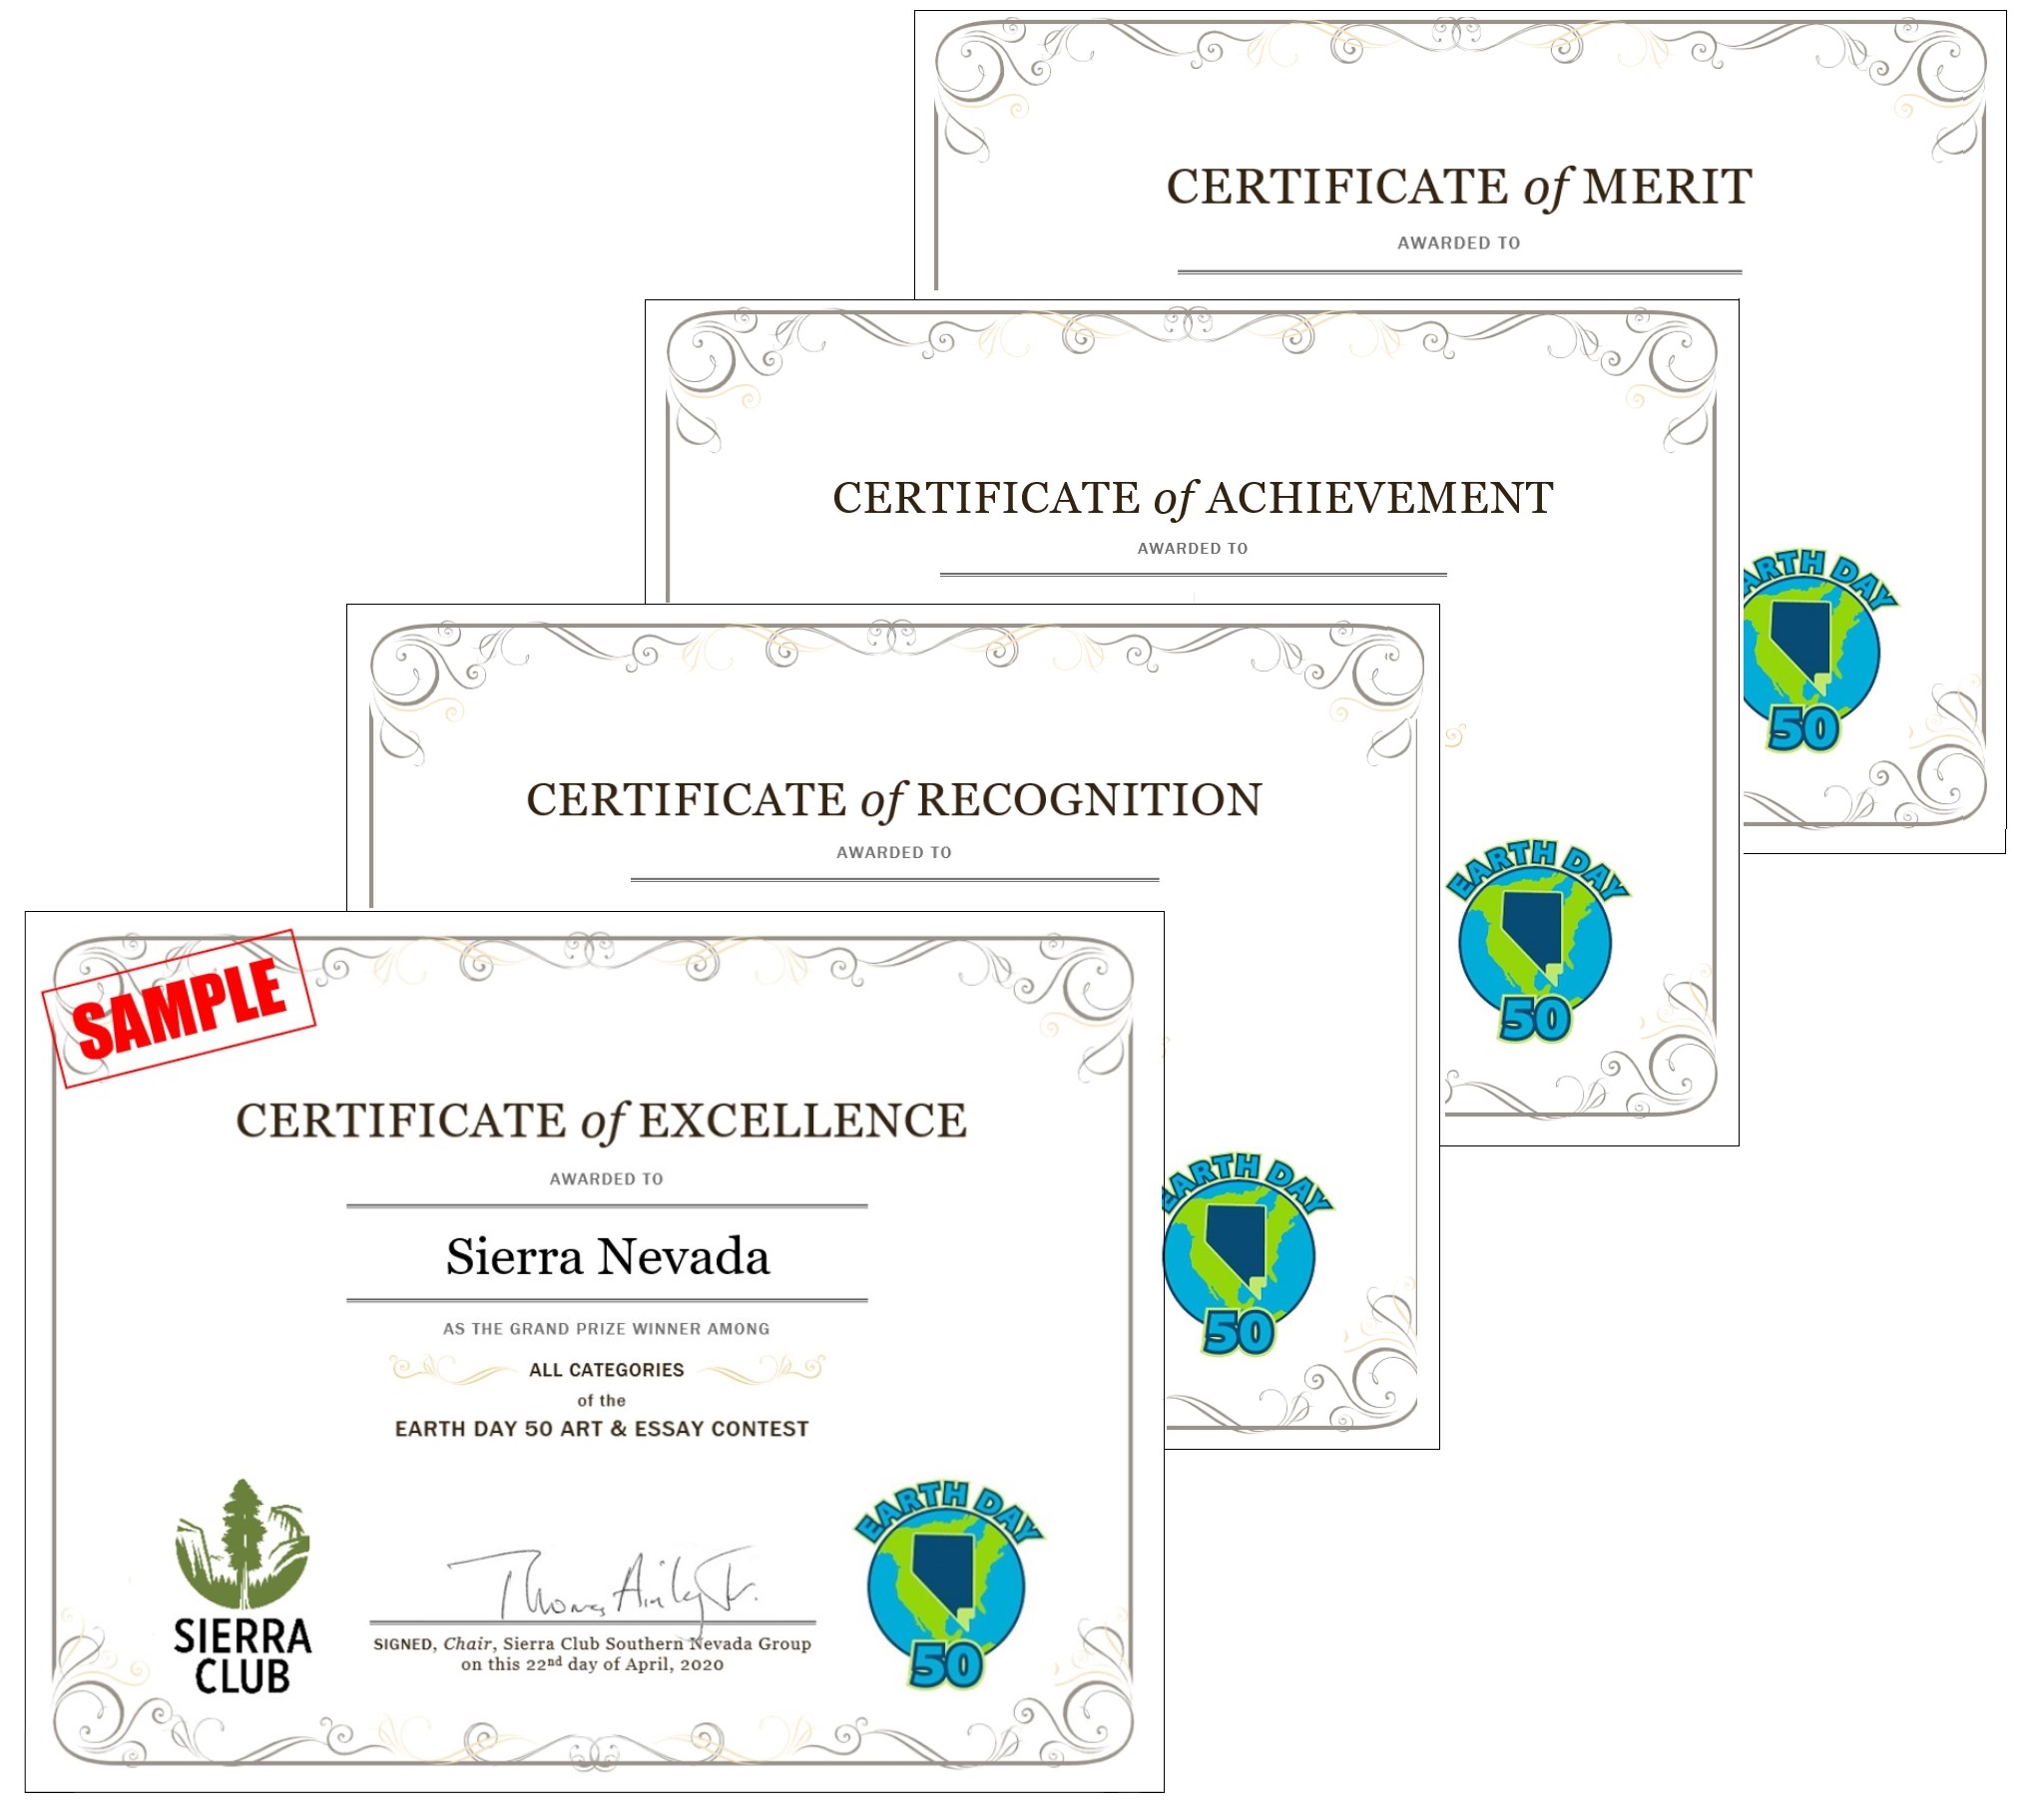 Earth Day 50 Certificate Samples